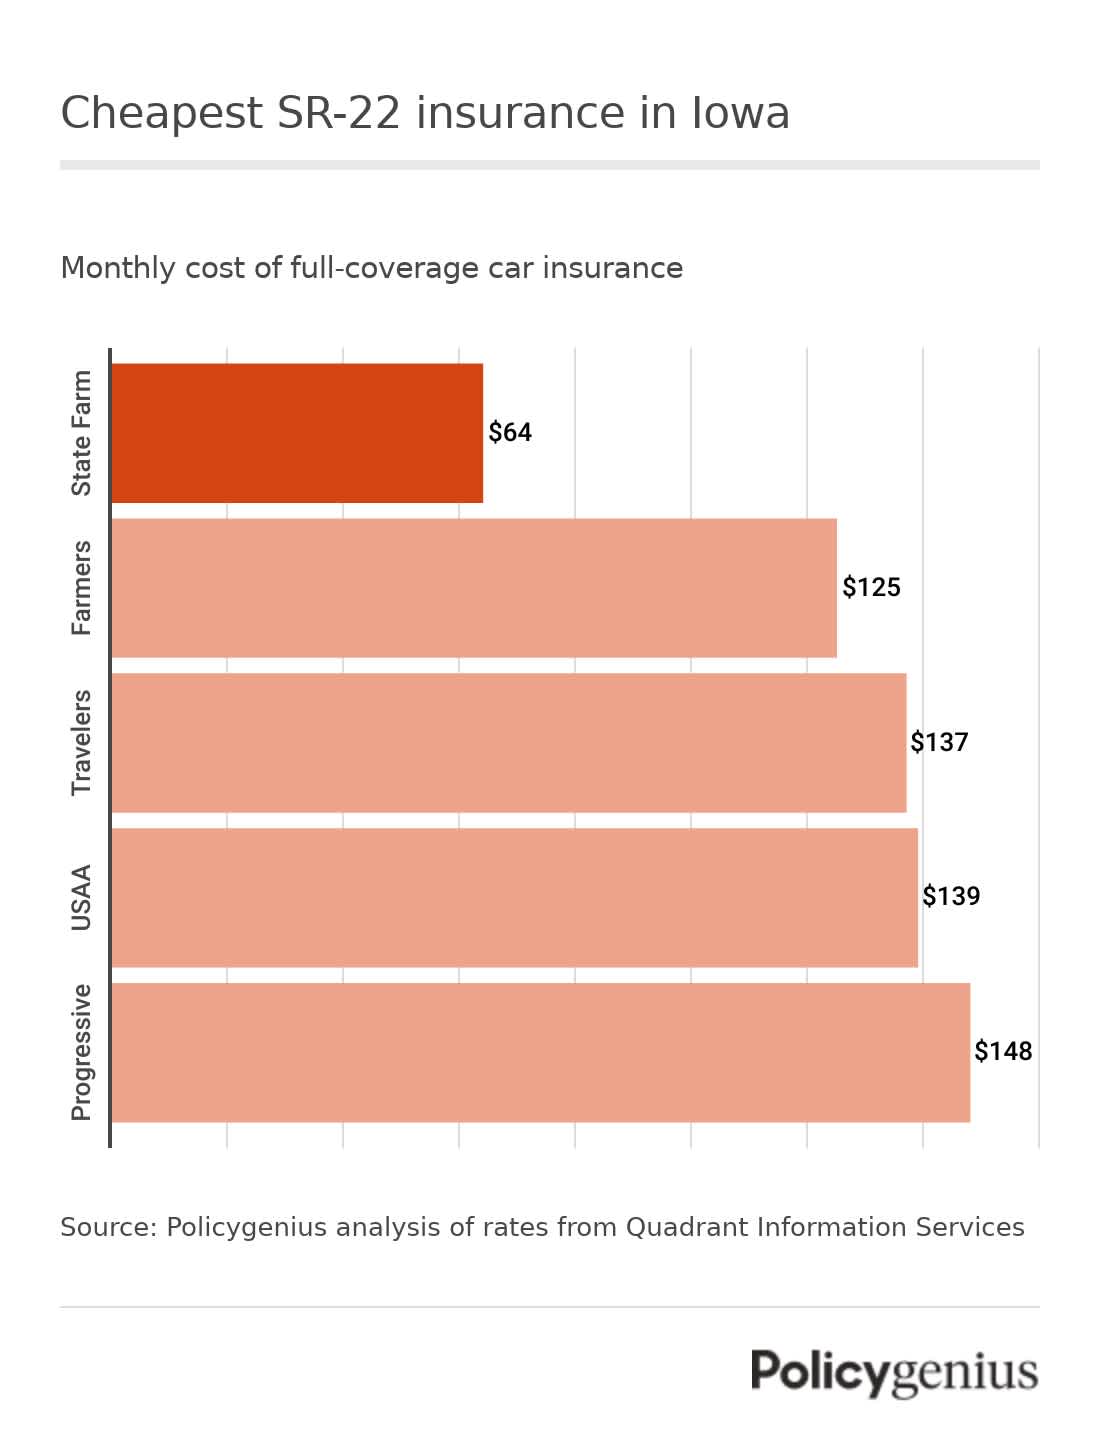 A bar graph showing the cheapest Sr-22 insurance in Iowa. The cheapest company is State Farm.